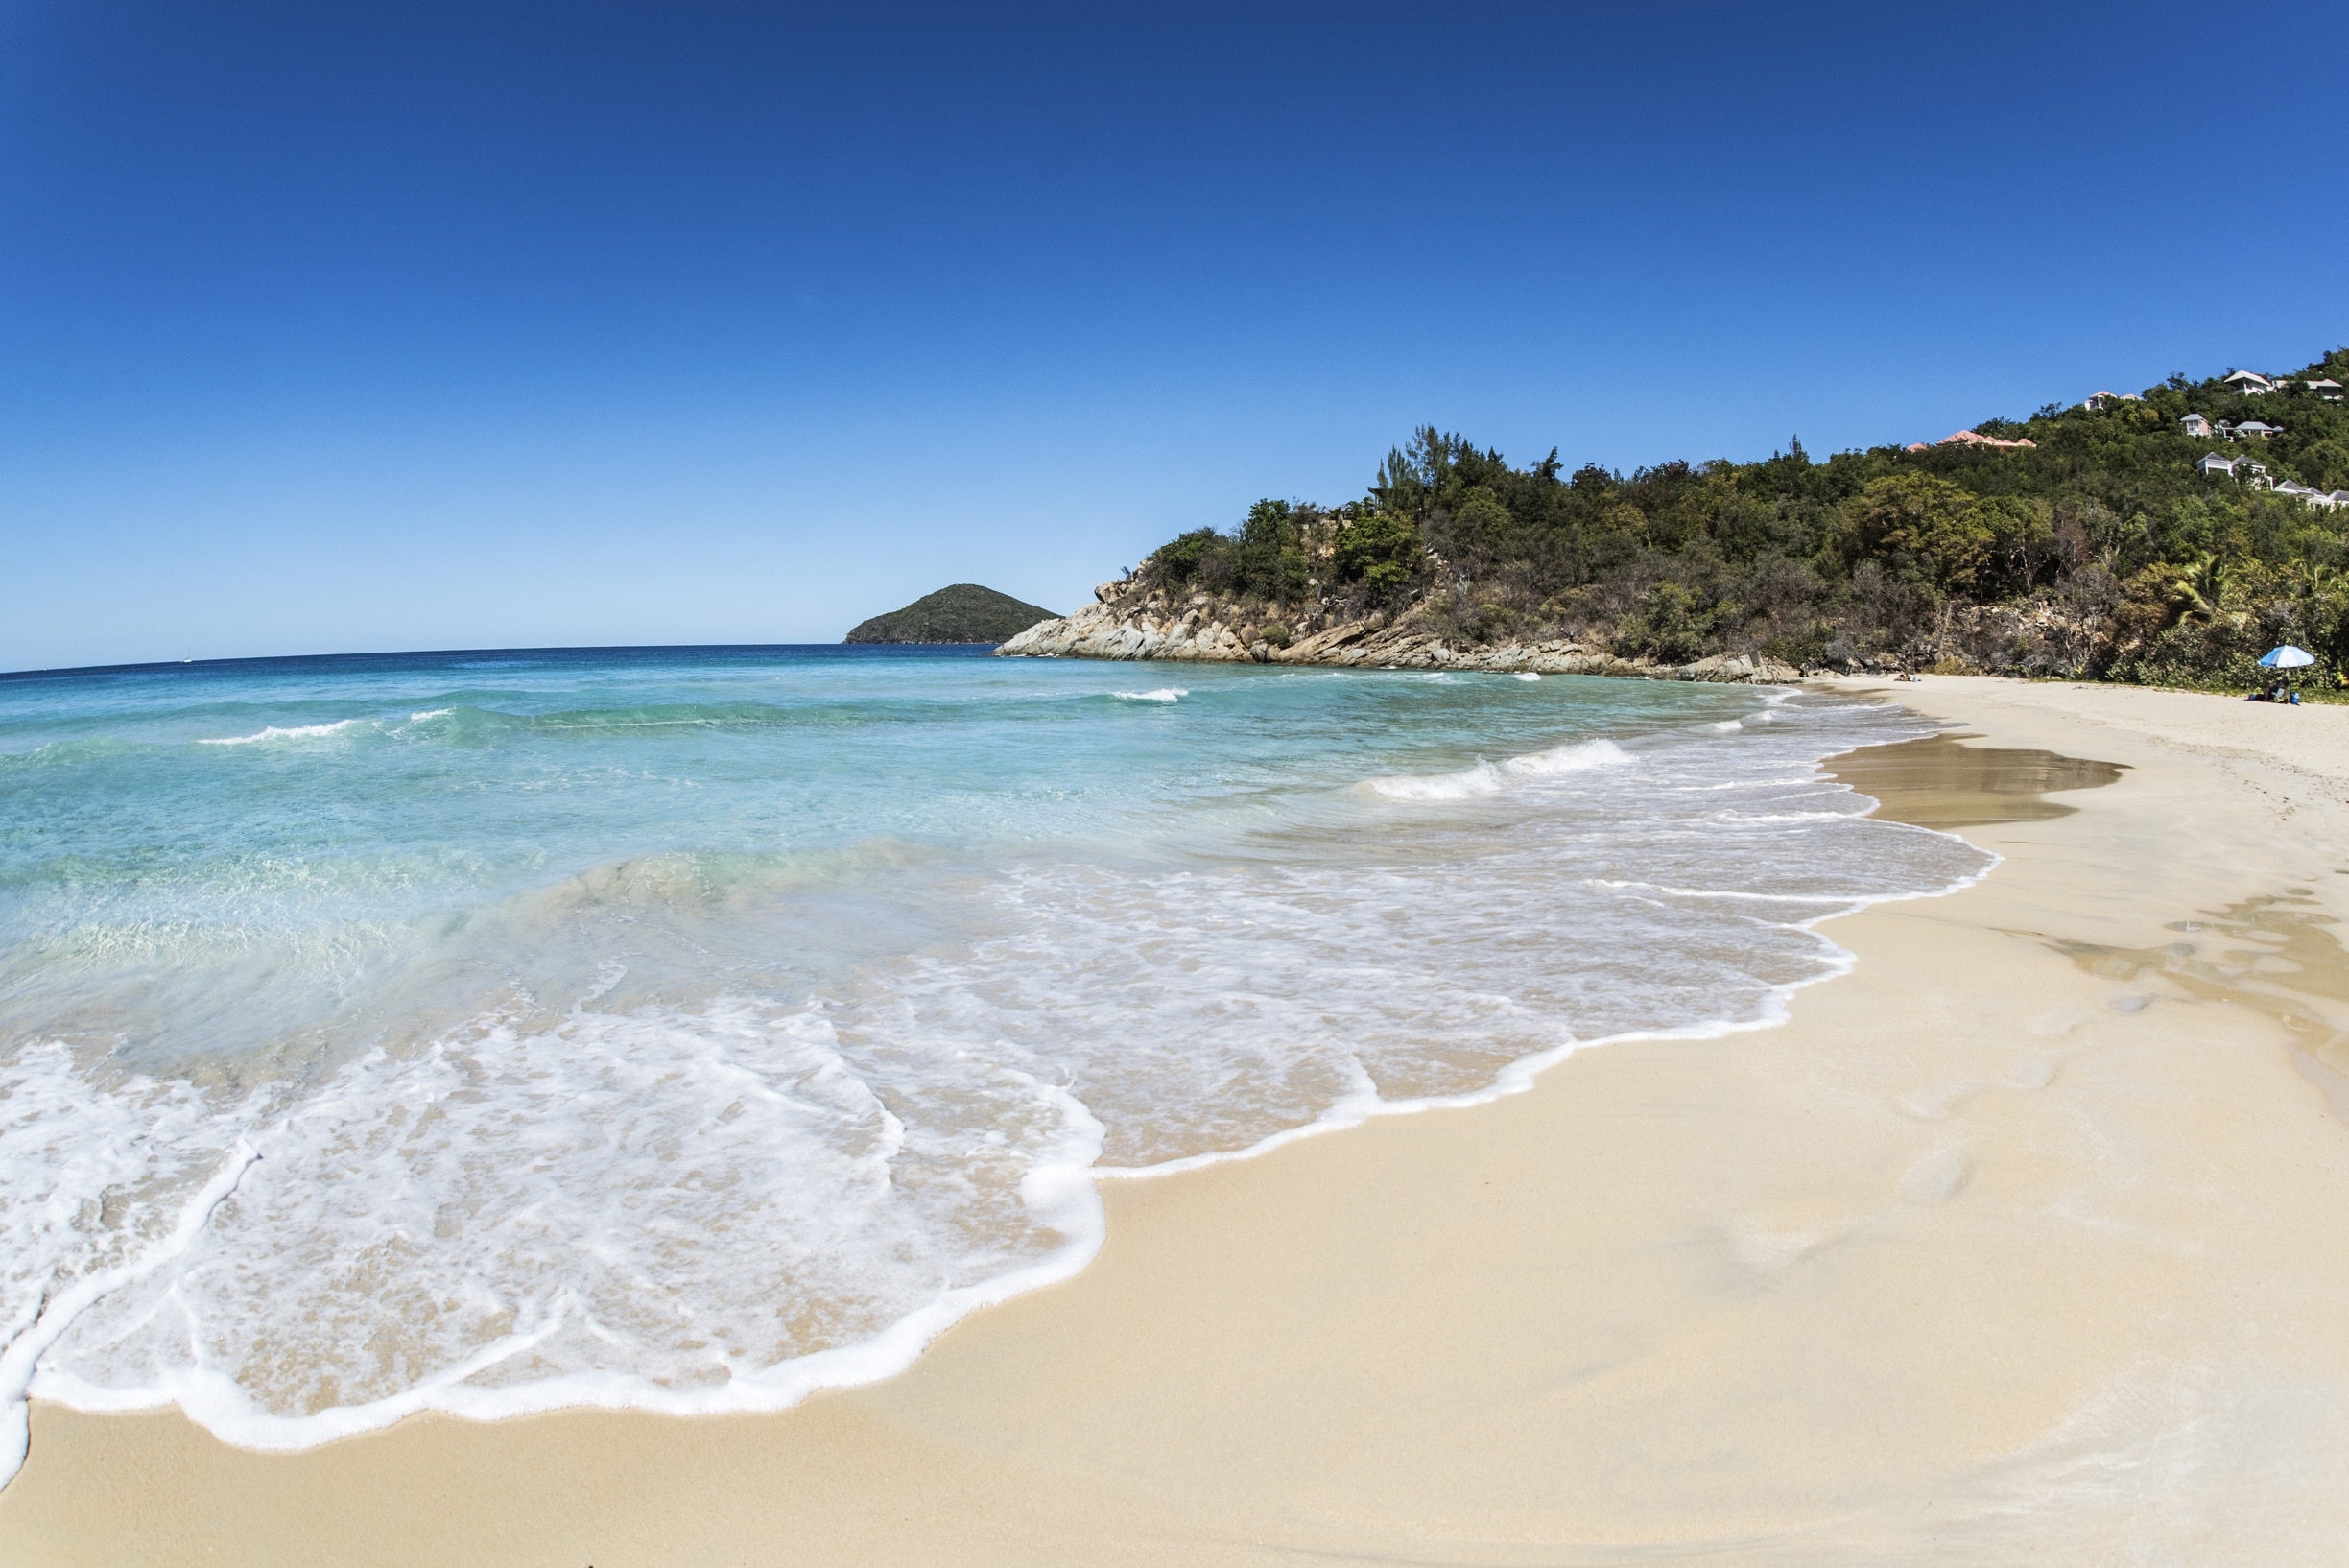 A secluded beach with exceptional water. #BeachBound #beachtips